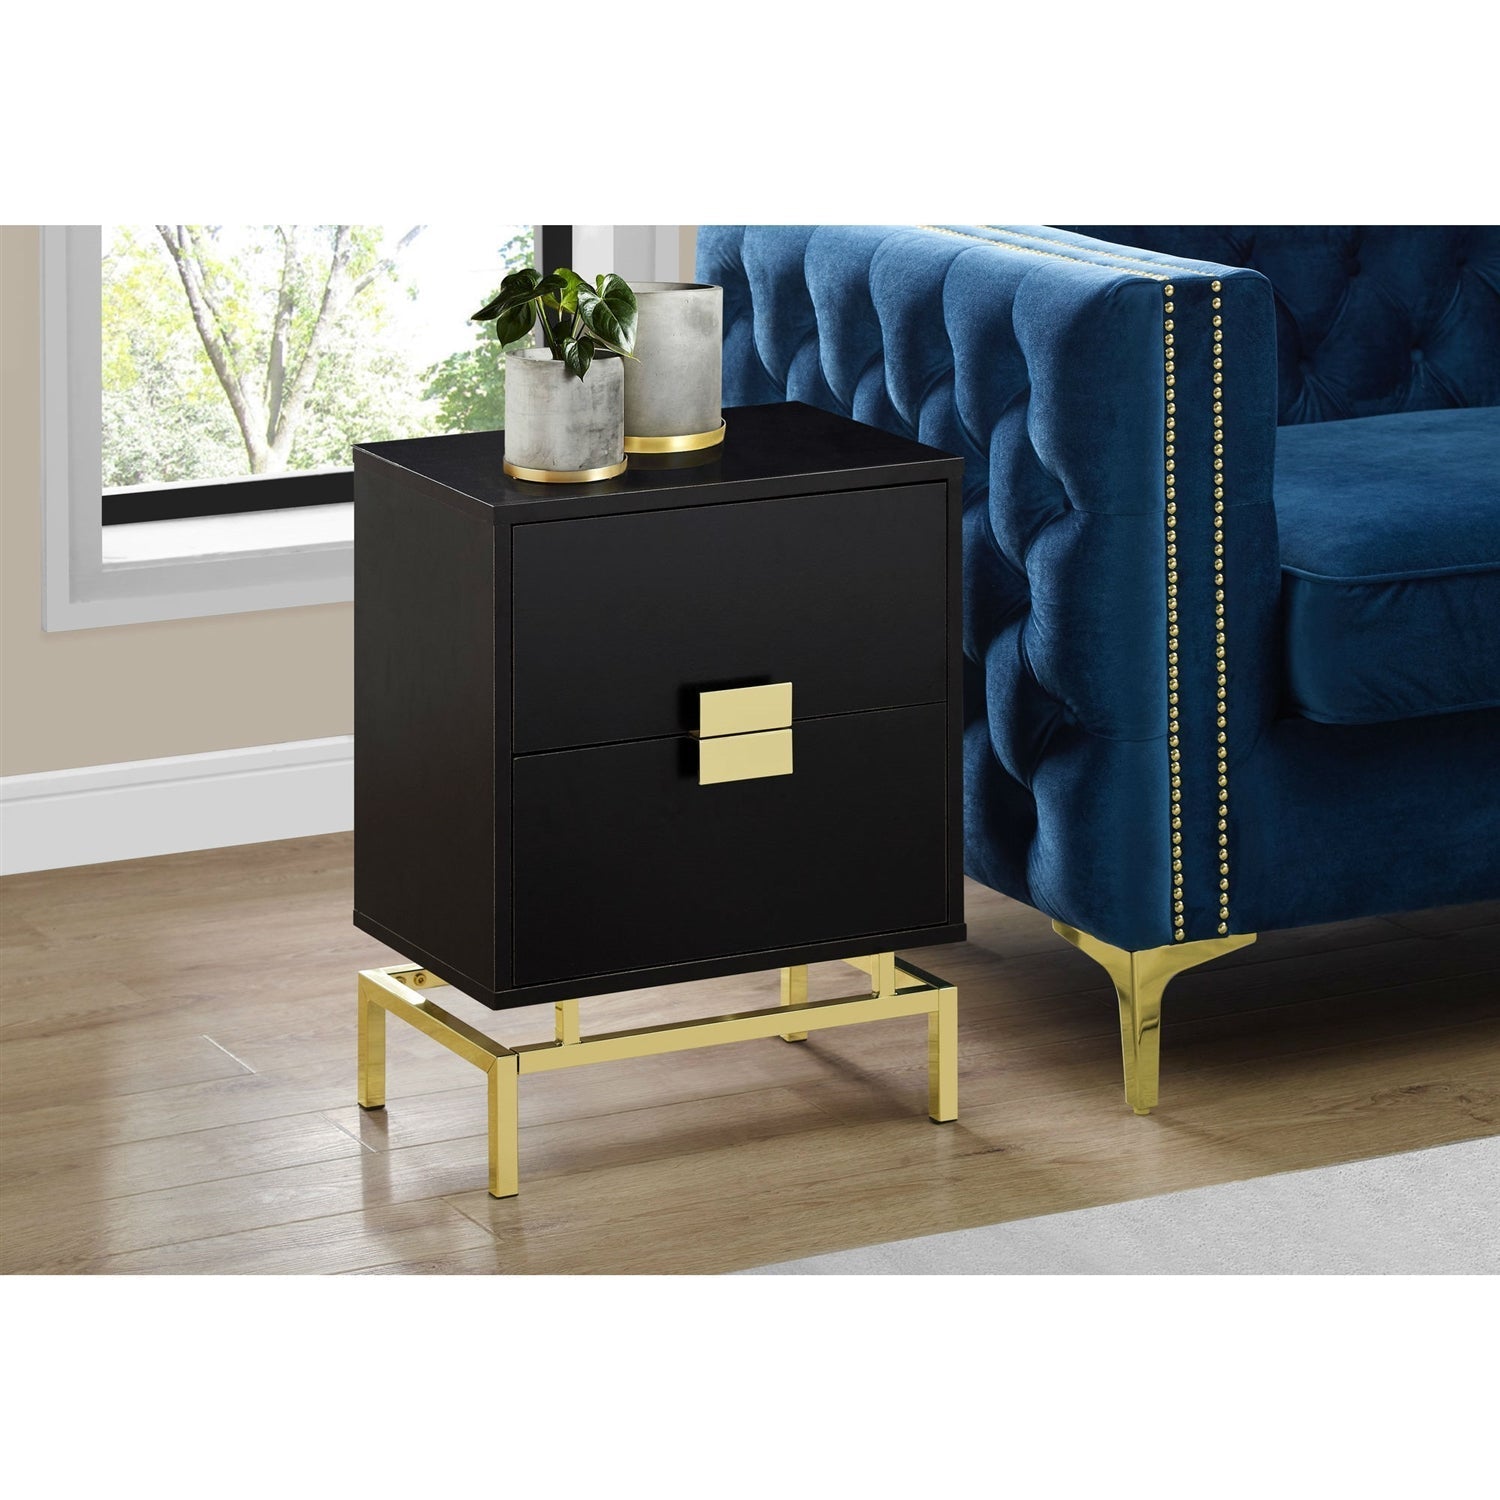 24in Retro 2 Drawer NightStand End Table Cappuccino with Gold Metal Legs-Novel Home